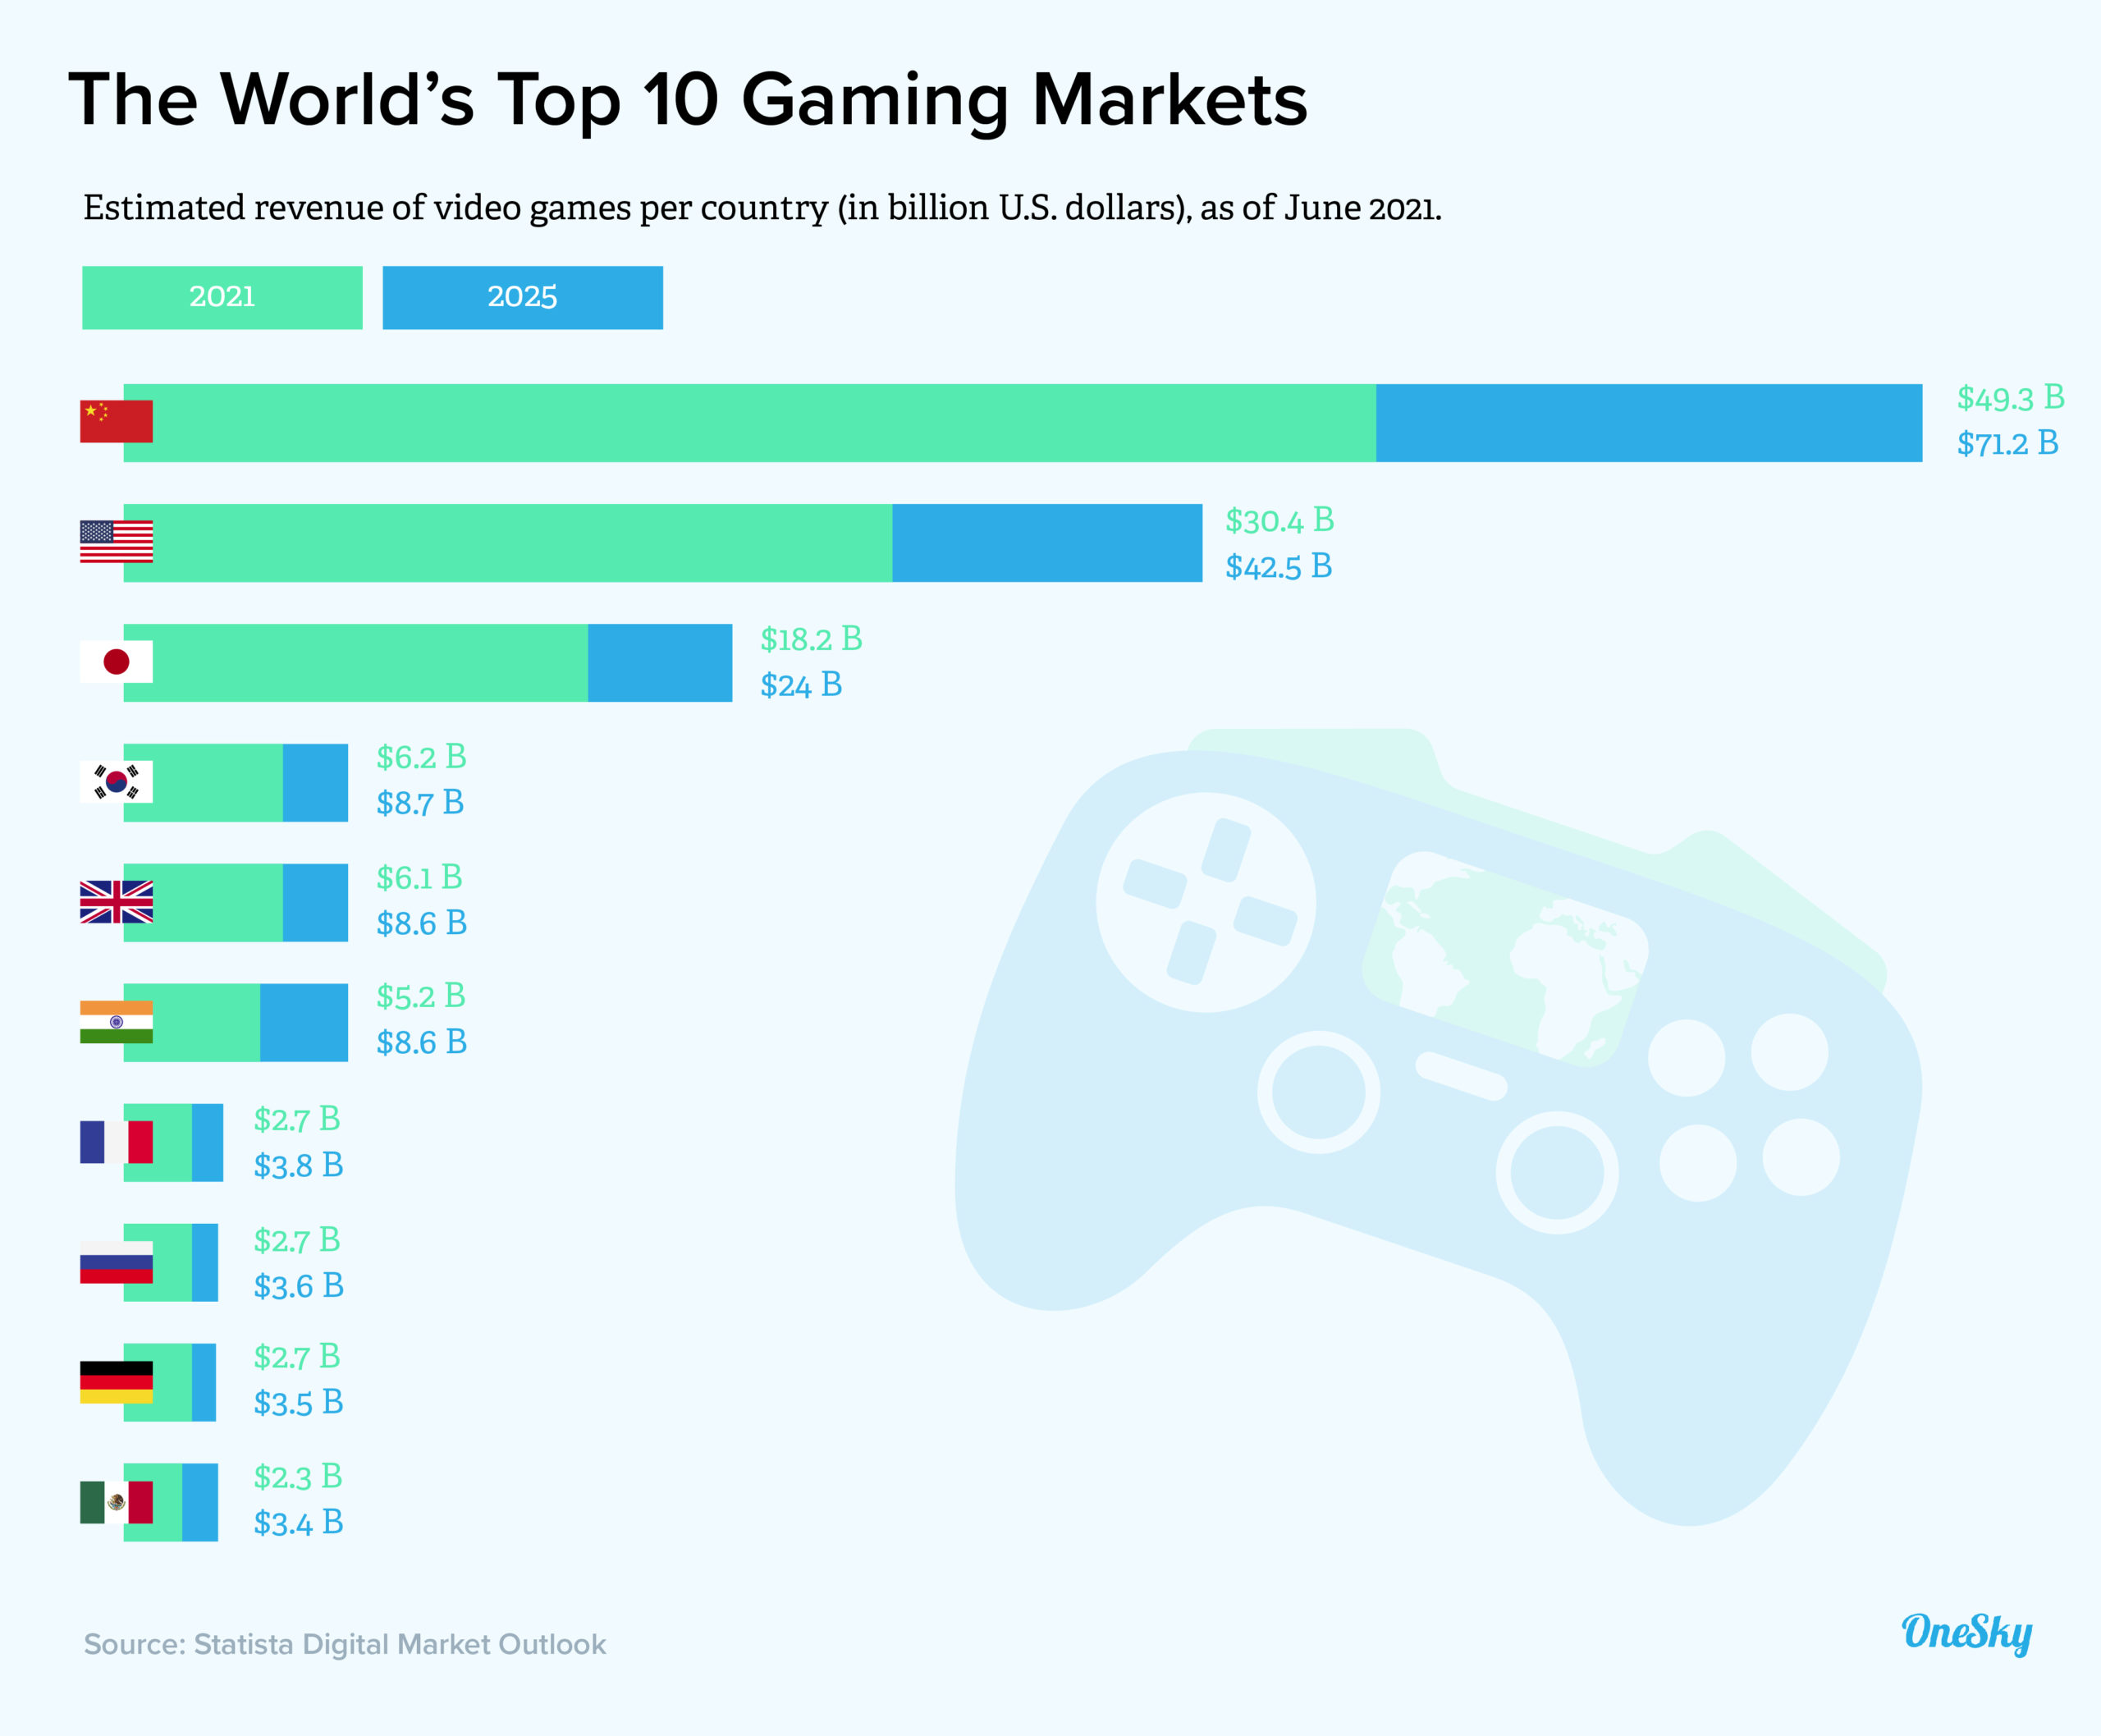 Why You Need To Localize Your Game For the International Market